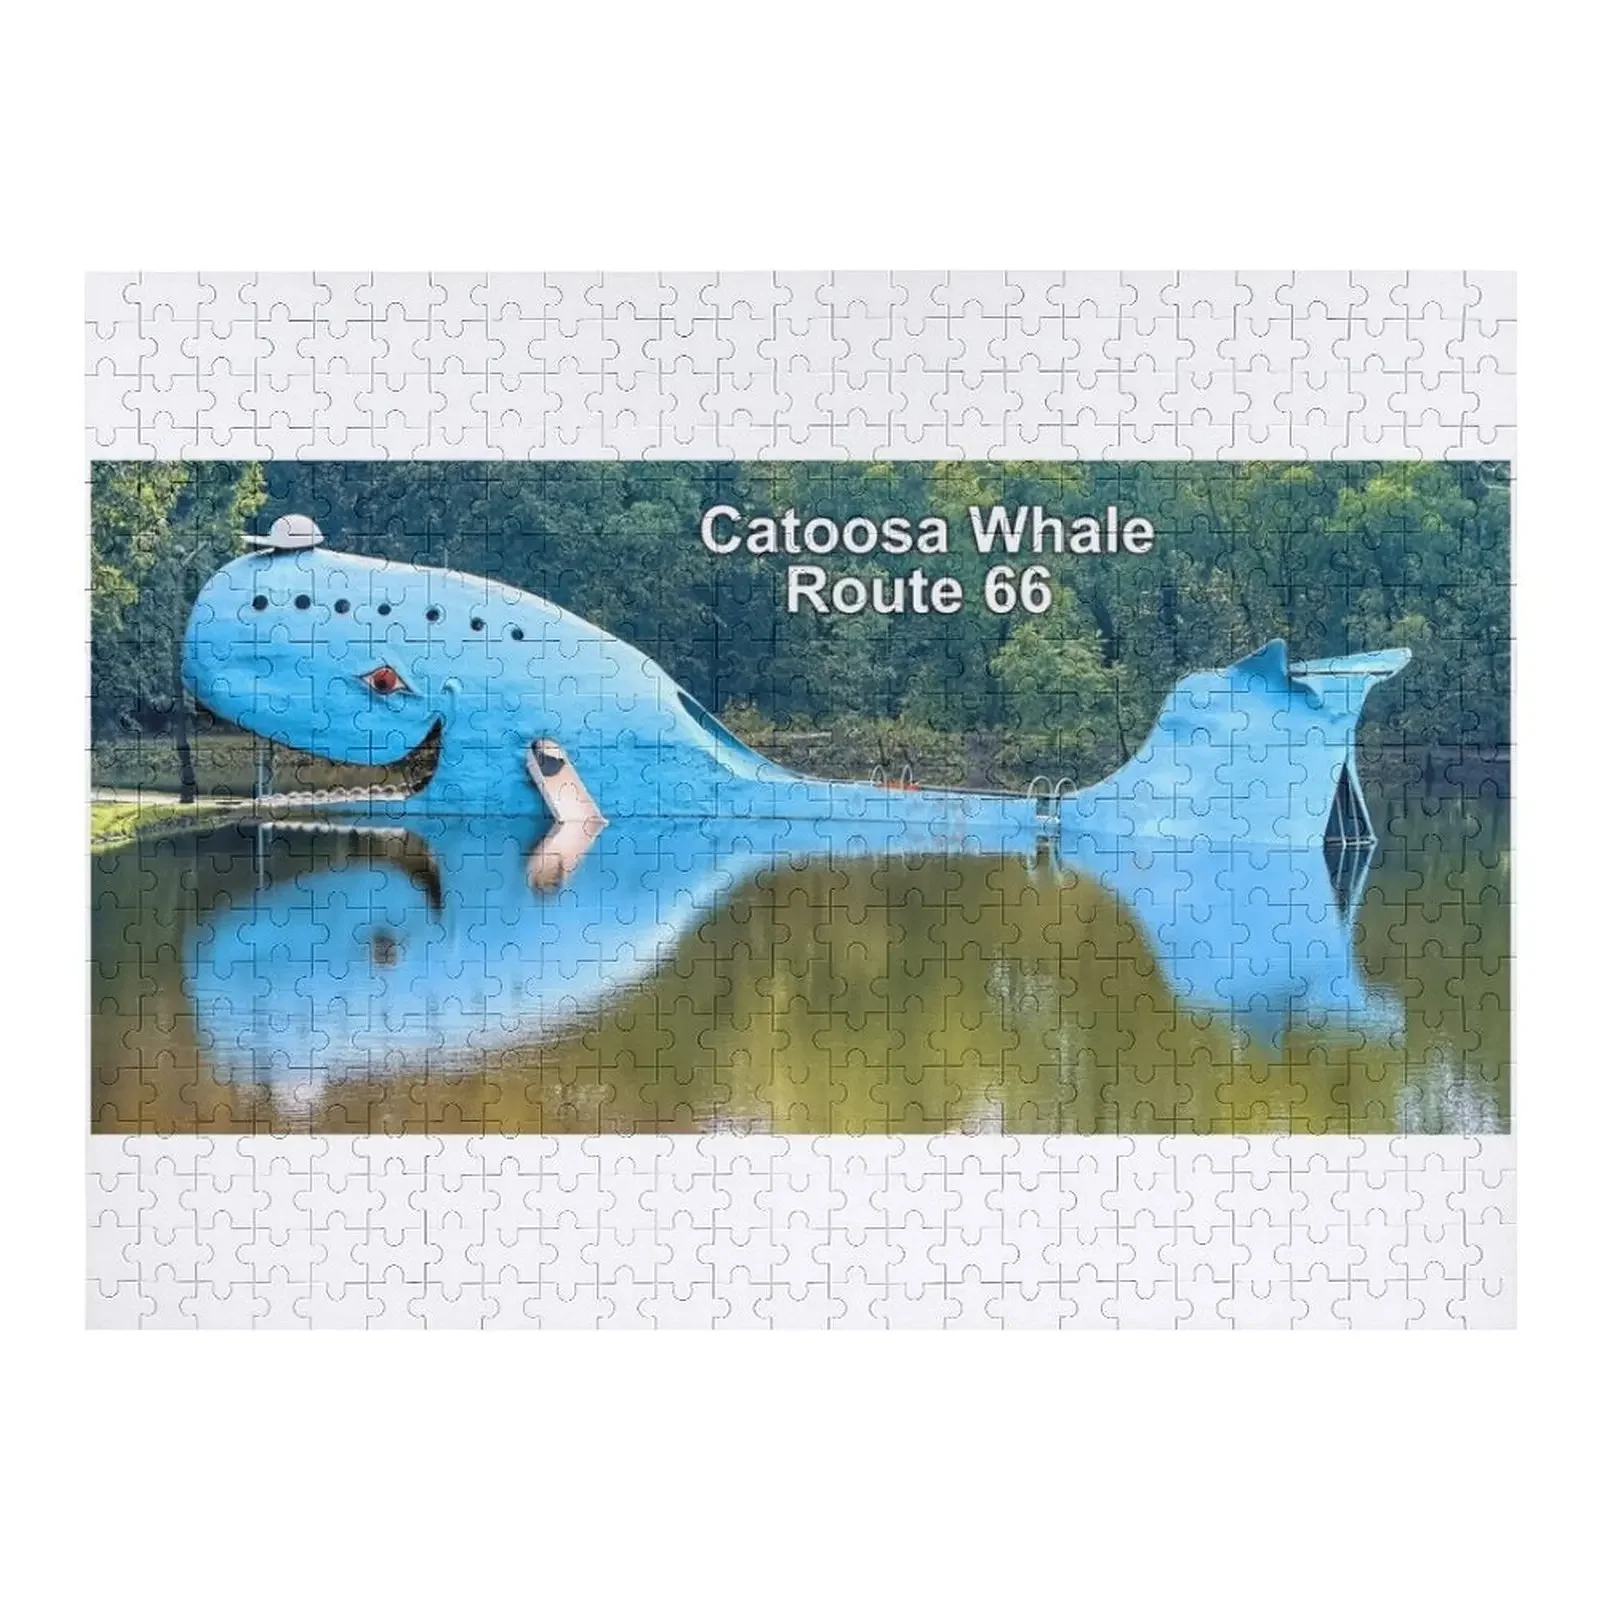 Route 66 Catoosa Whale - Big Blue Whale Jigsaw Puzzle Novel Toys For Children 2022 Personalized Puzzle